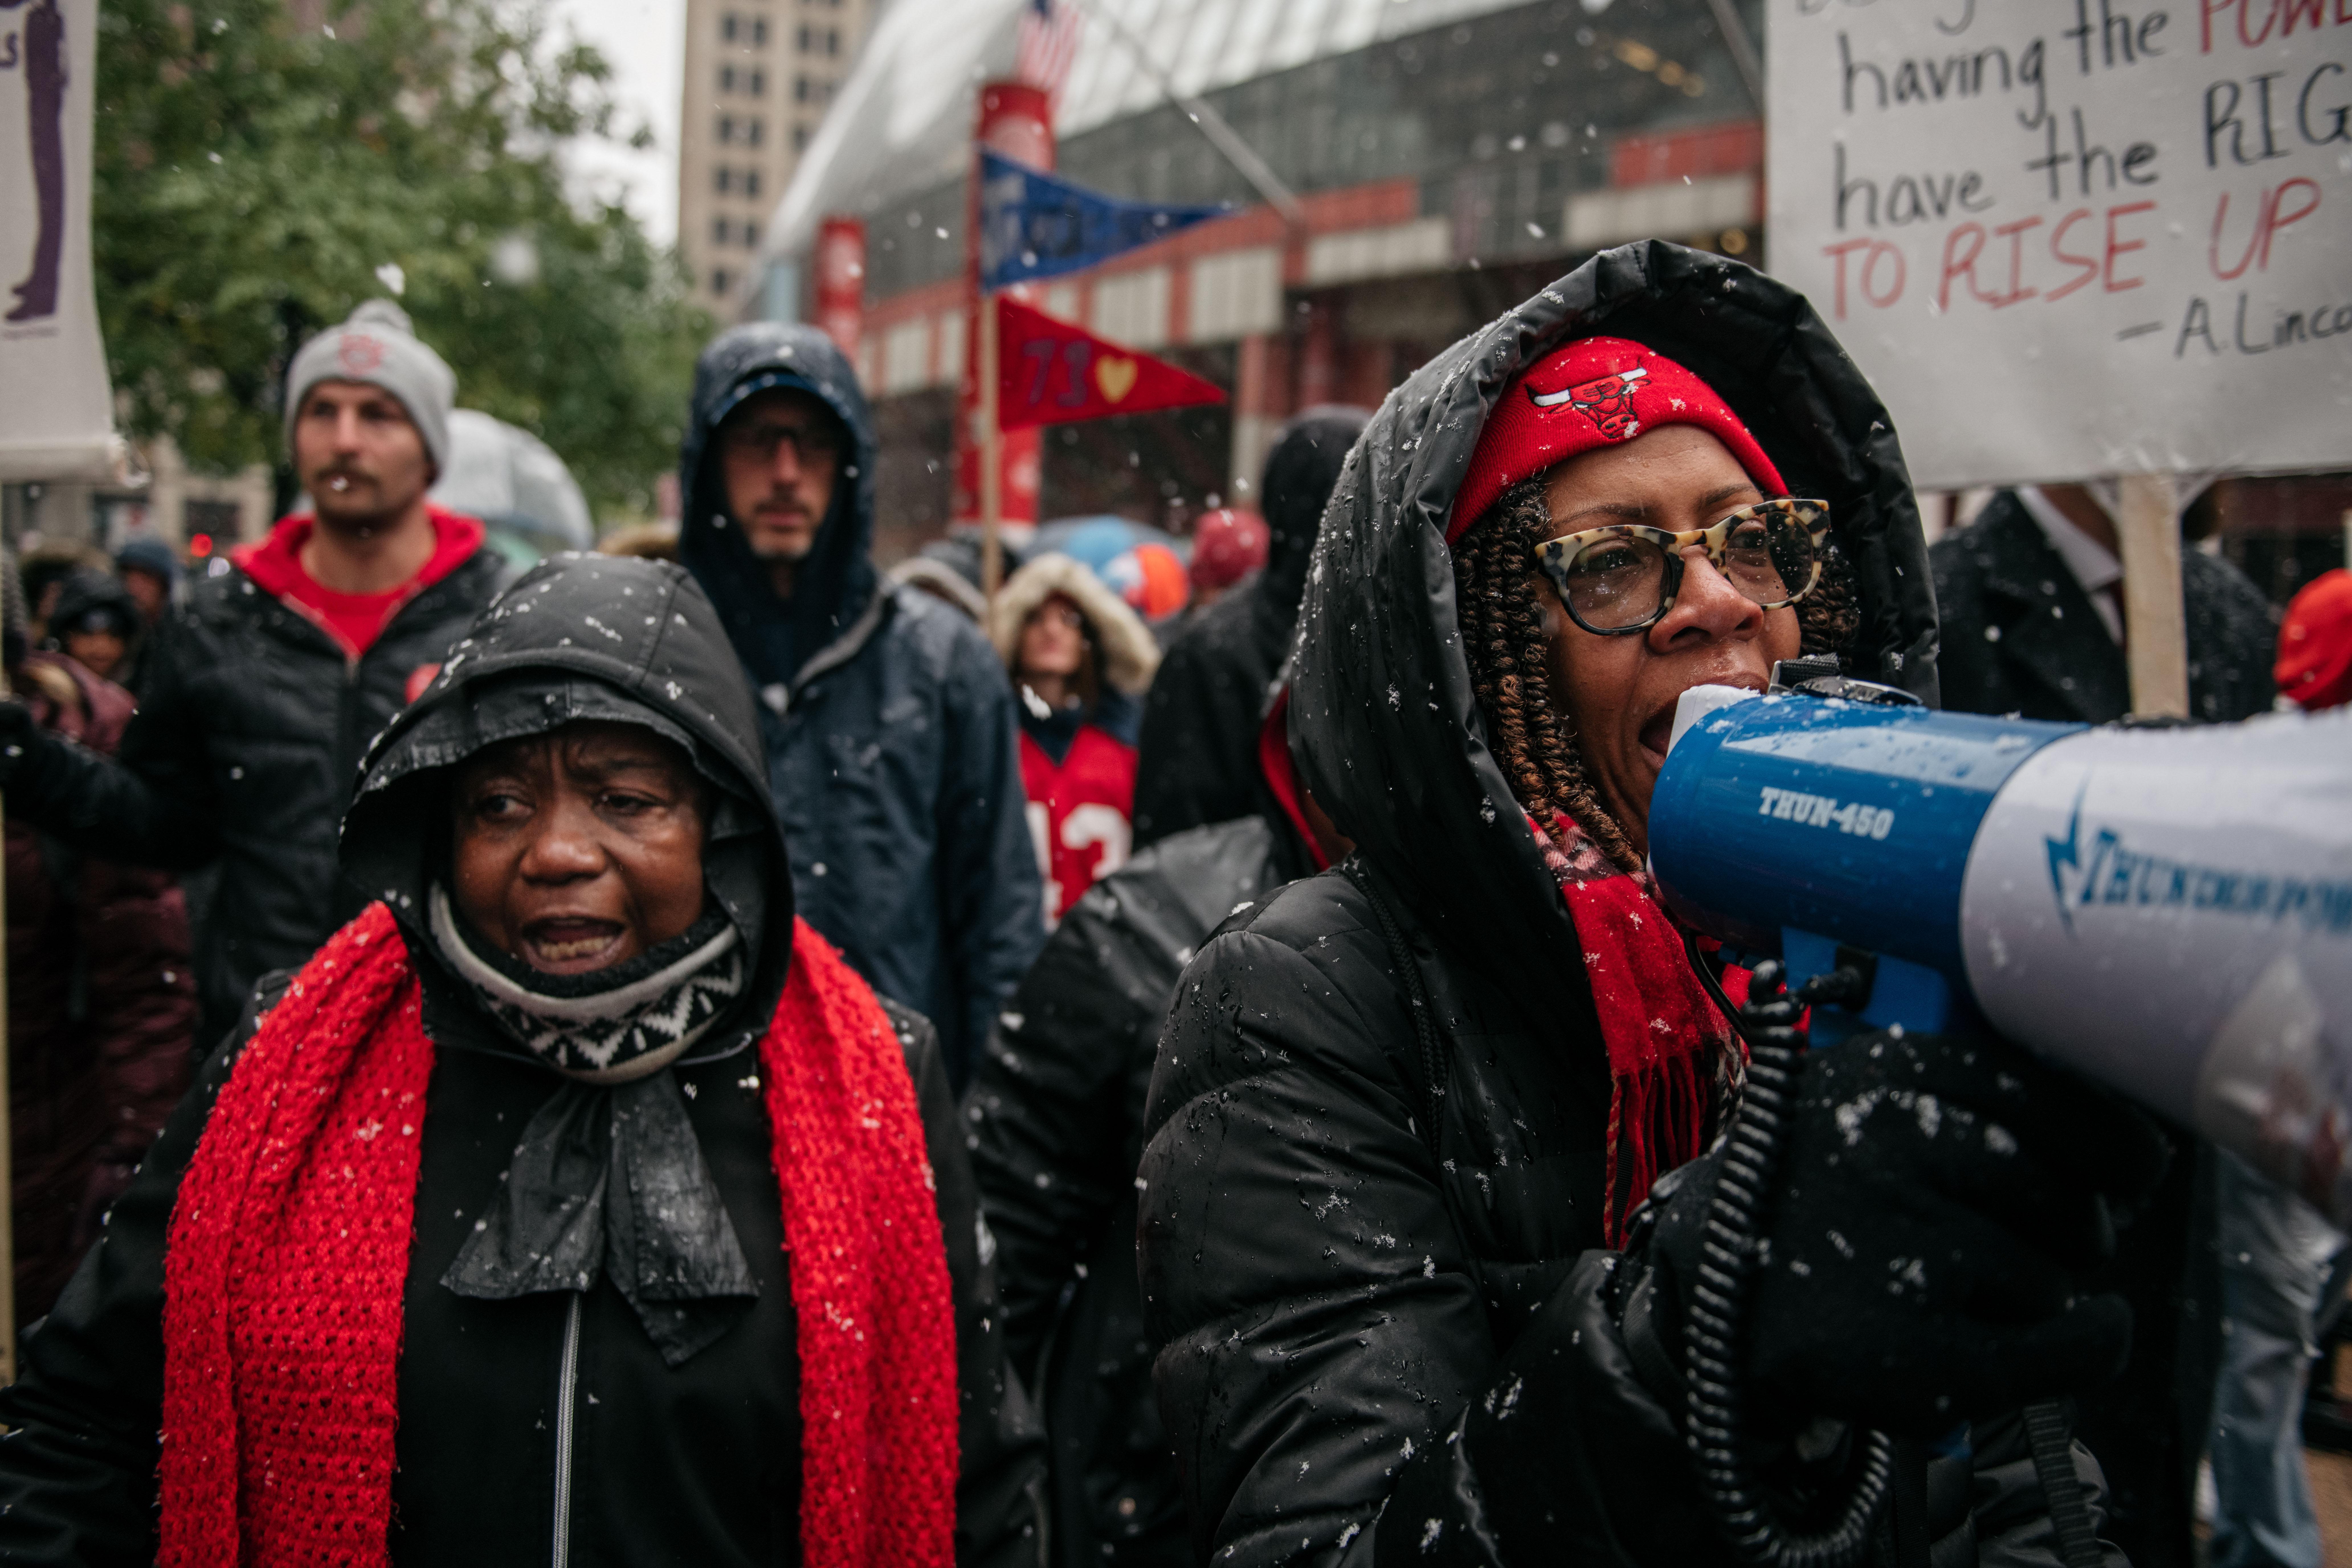 A woman in a crowd of demonstrators speaks into a megaphone. Some hold sings, and snow falls around the marchers.